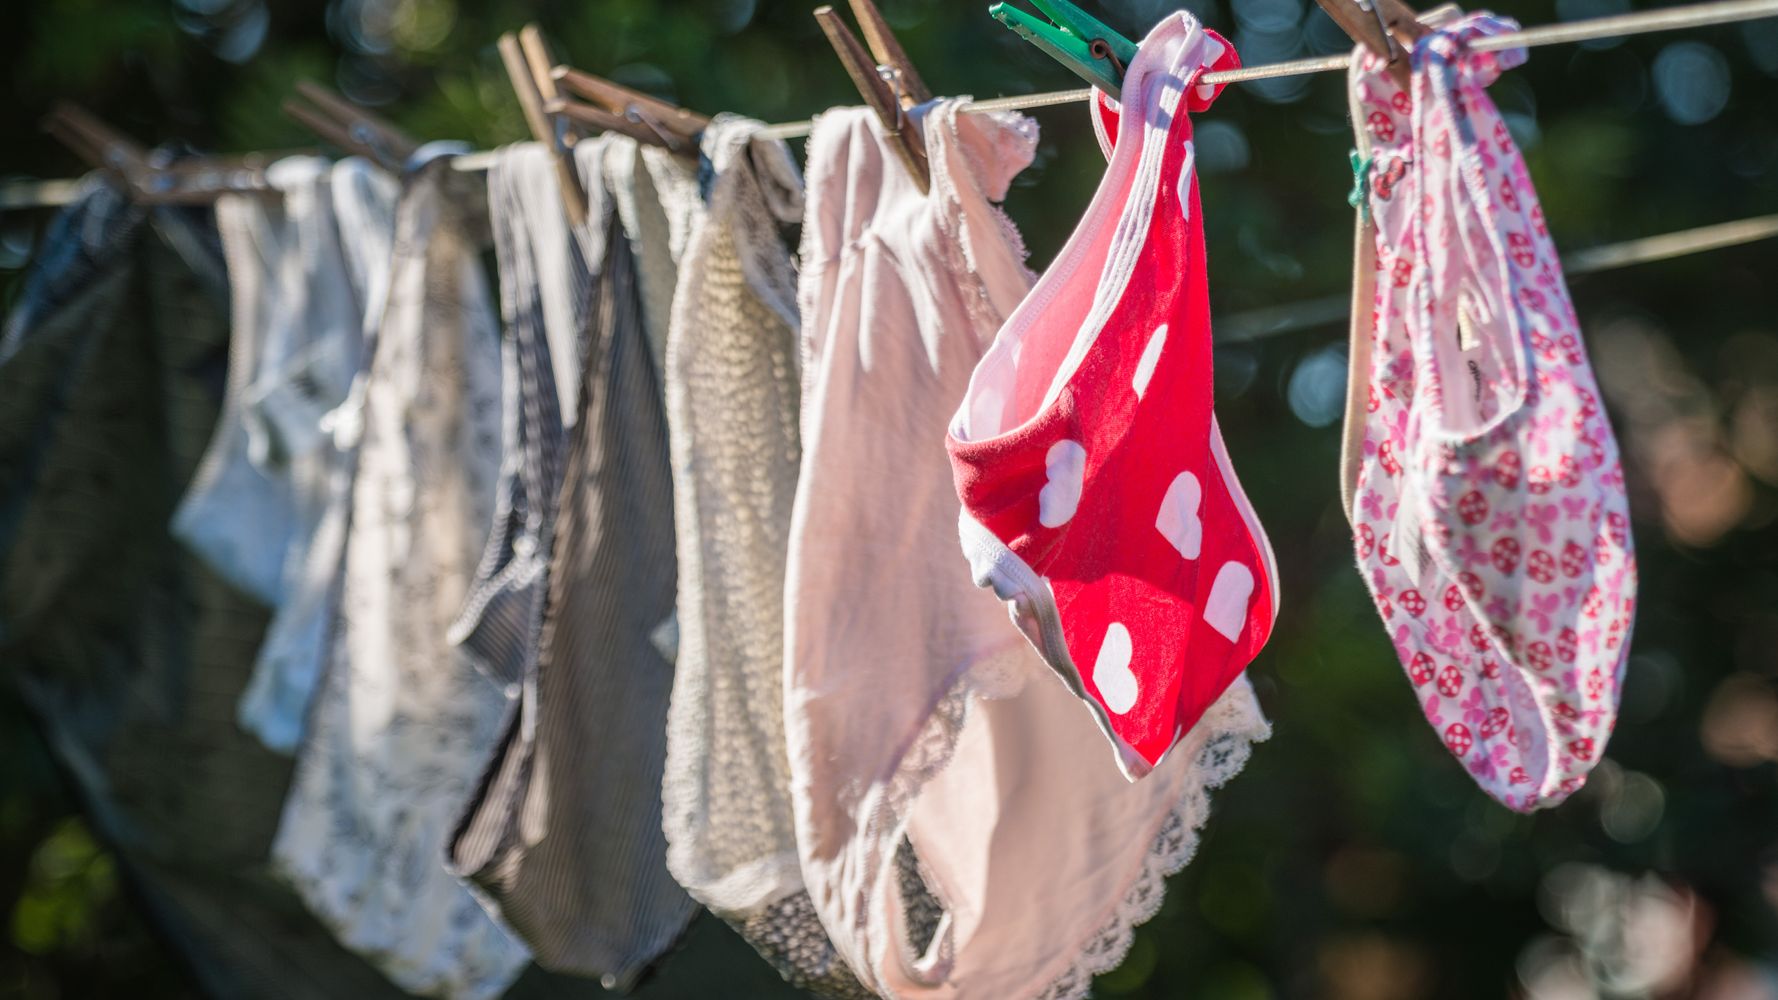 Weird ways to make money: sell your knickers